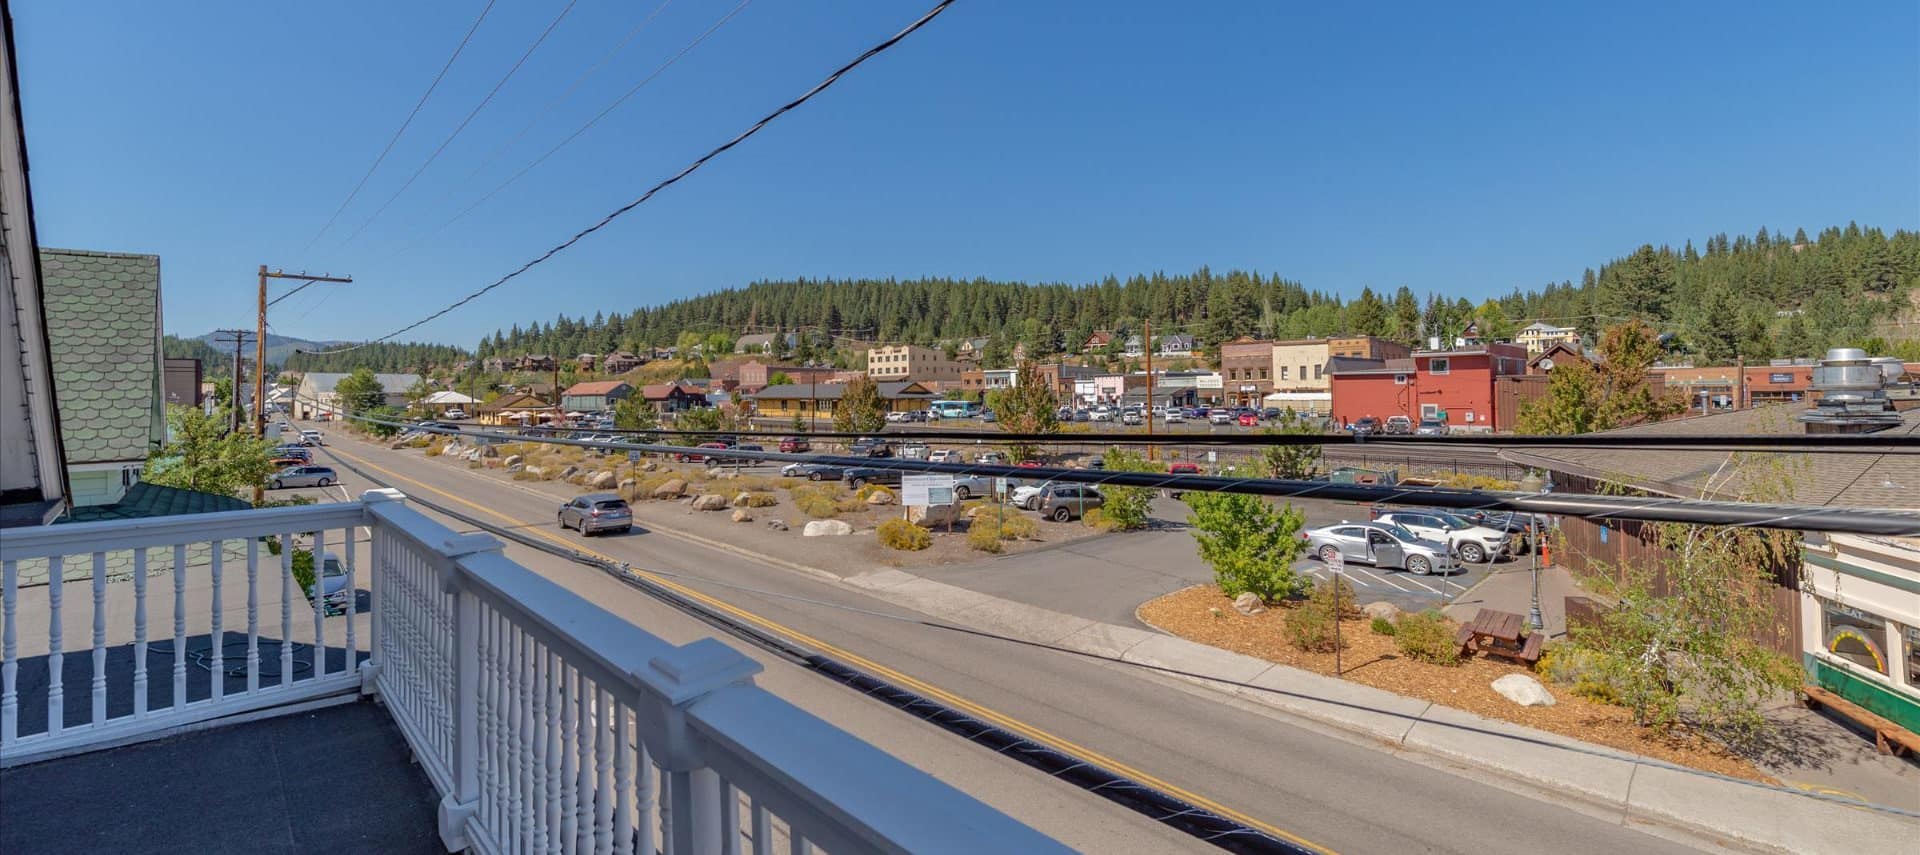 View of the town of Truckee from a balcony patio on the property